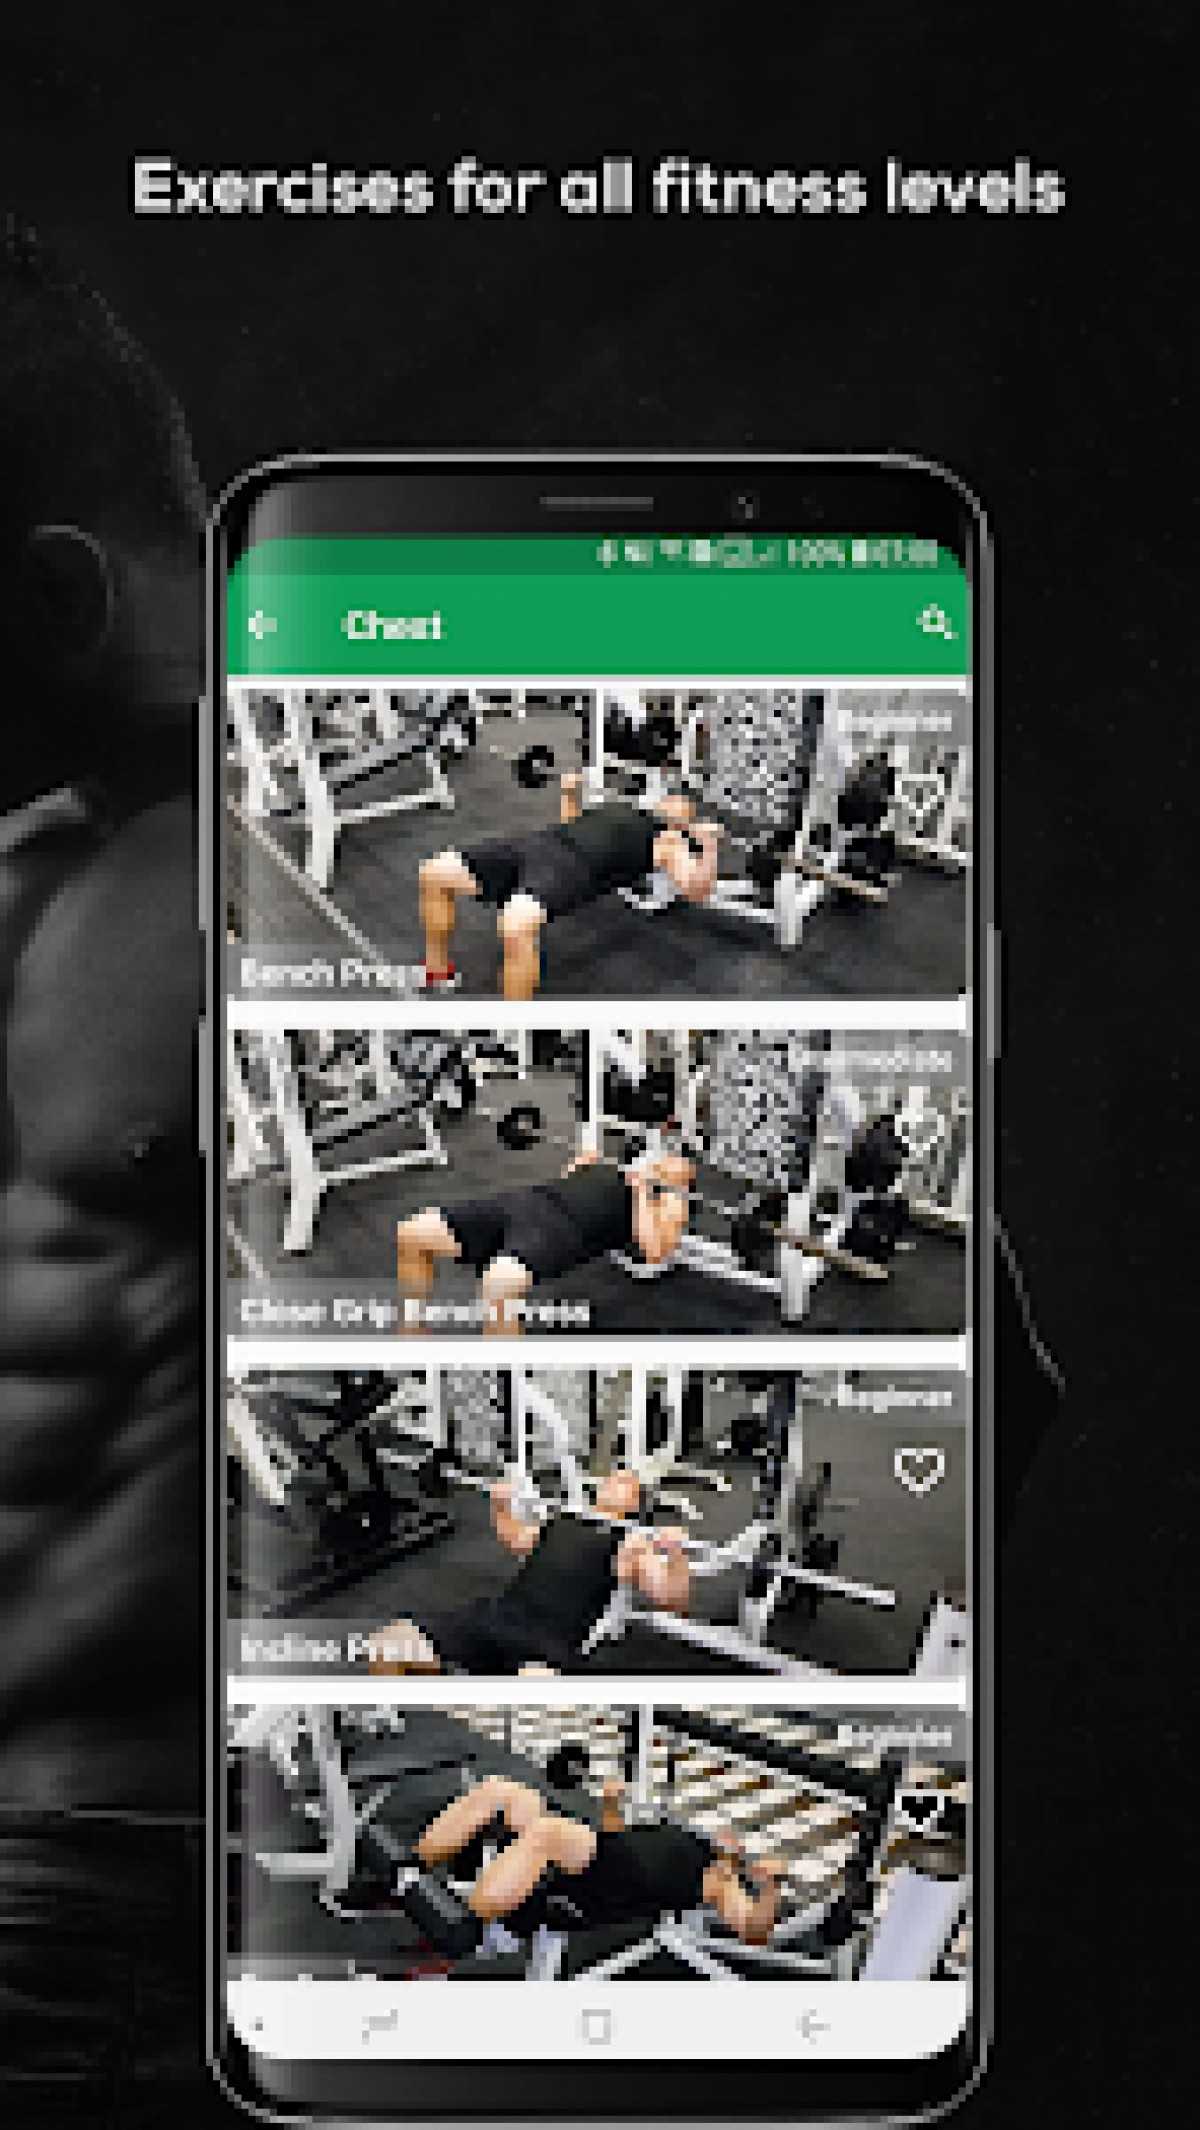 Fitvate – Gym Workout Trainer Fitness Coach Plans v7.4 (Unlocked) Apk